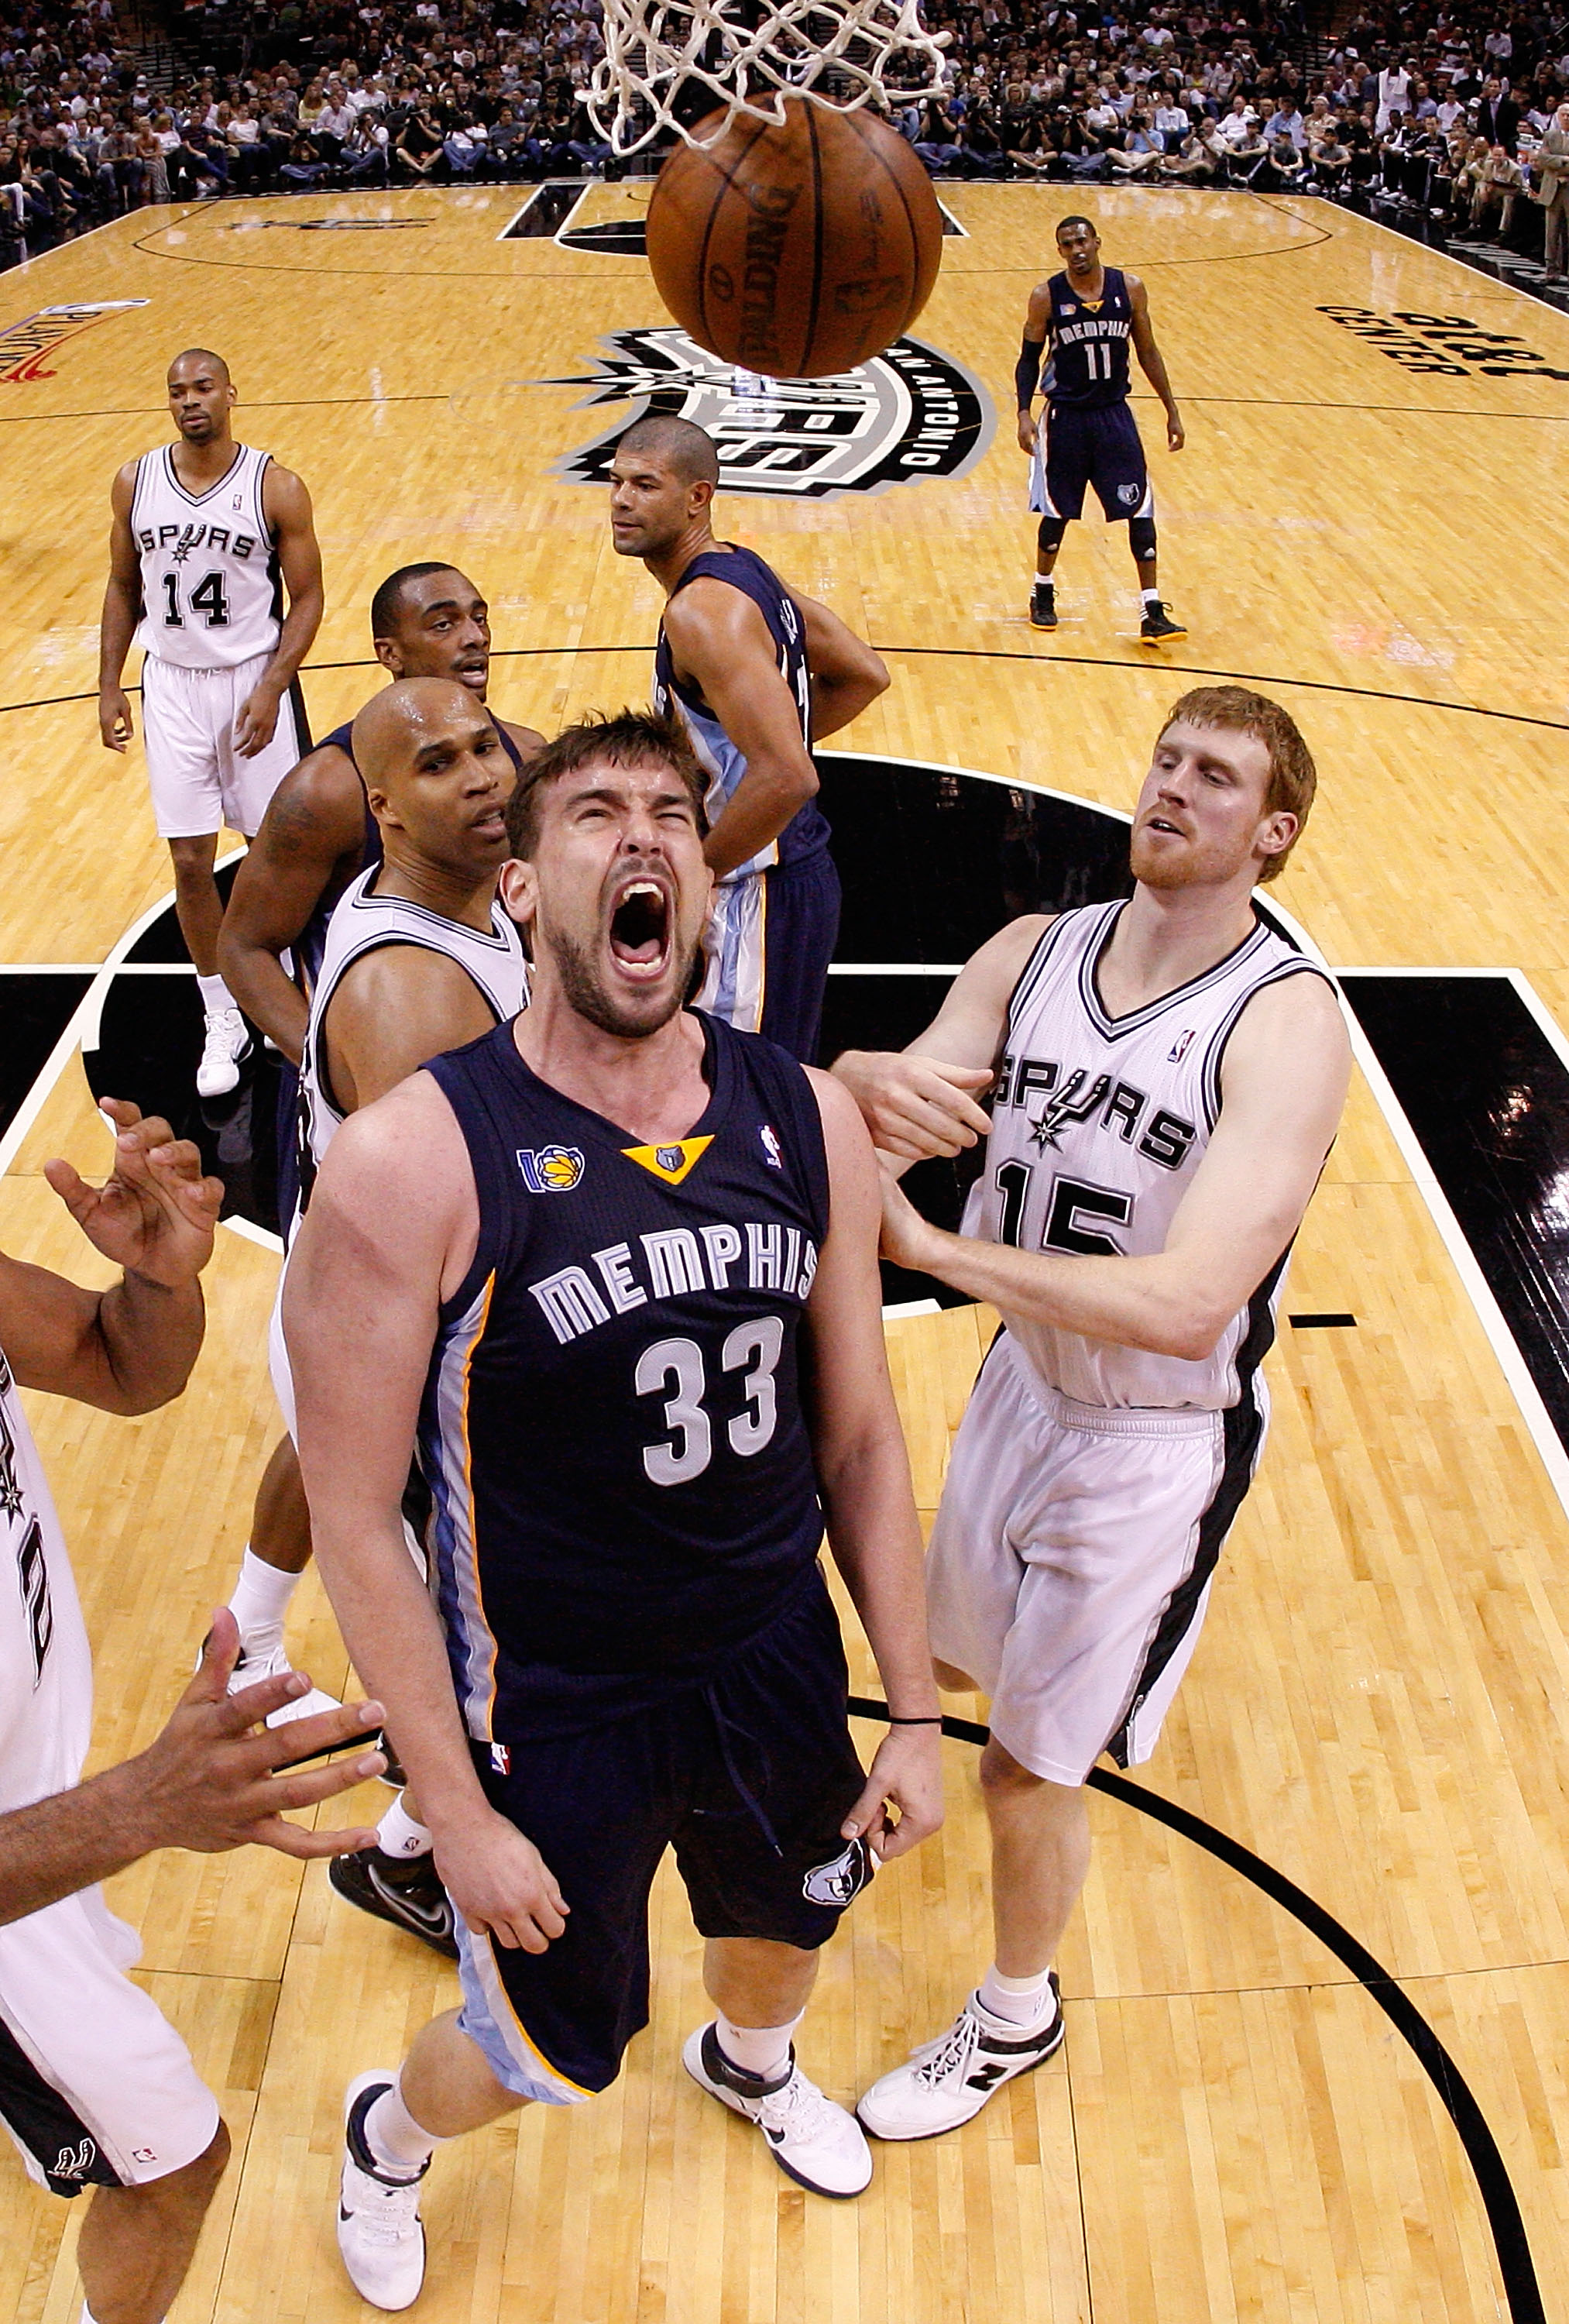 SAN ANTONIO, TX - APRIL 17:  Center Marc Gasol #33 of the Memphis Grizzlies reacts against the San Antonio Spurs in Game One of the Western Conference Quarterfinals in the 2011 NBA Playoffs on April 17, 2011 at AT&T Center in San Antonio, Texas.  NOTE TO